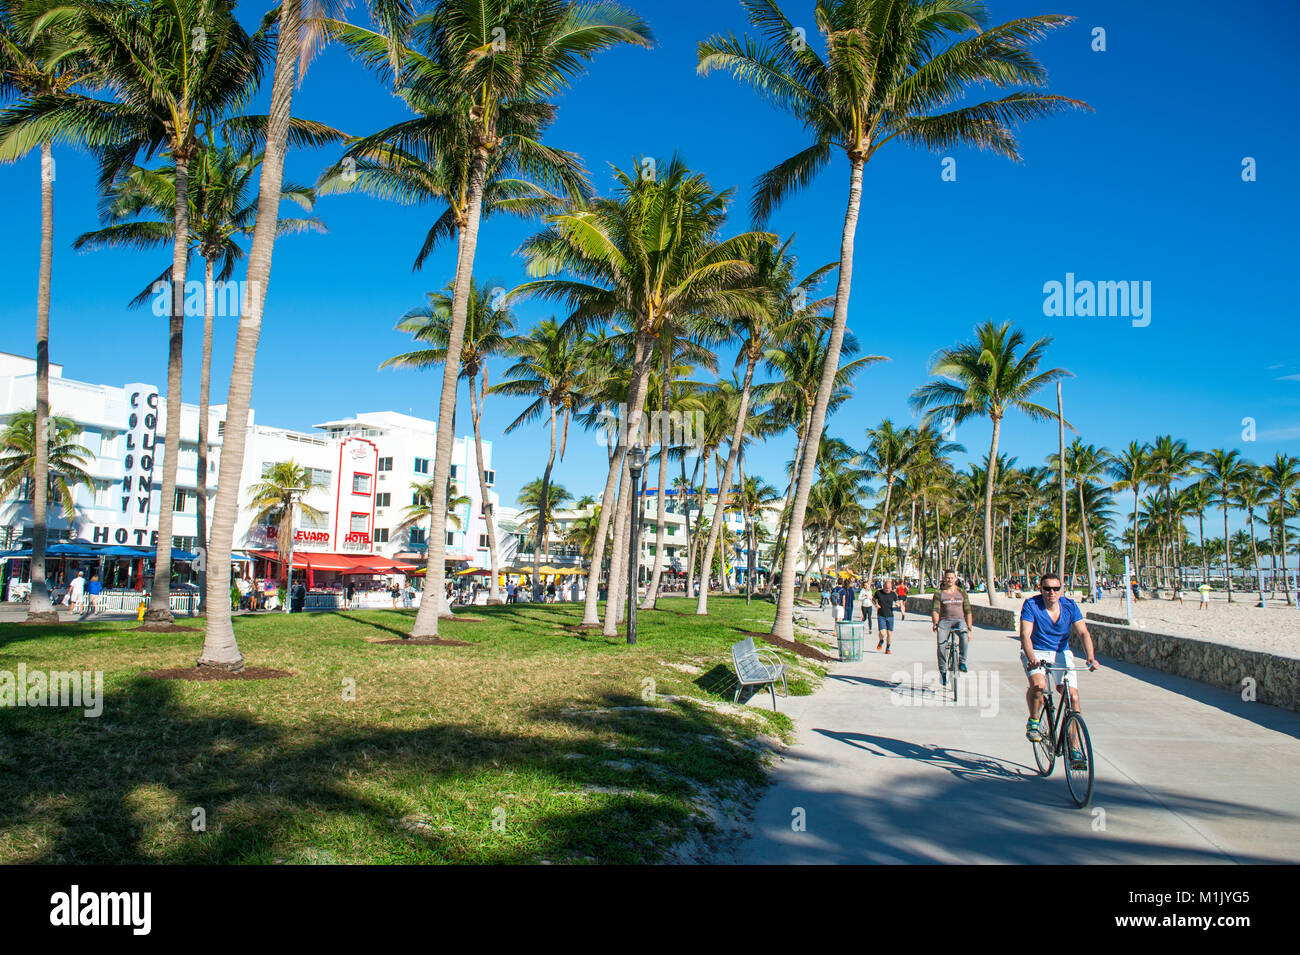 MIAMI - DECEMBER 27, 2017: Cyclists and joggers share the morning beachfront boardwalk promenade at Lummus Park in South Beach. Stock Photo